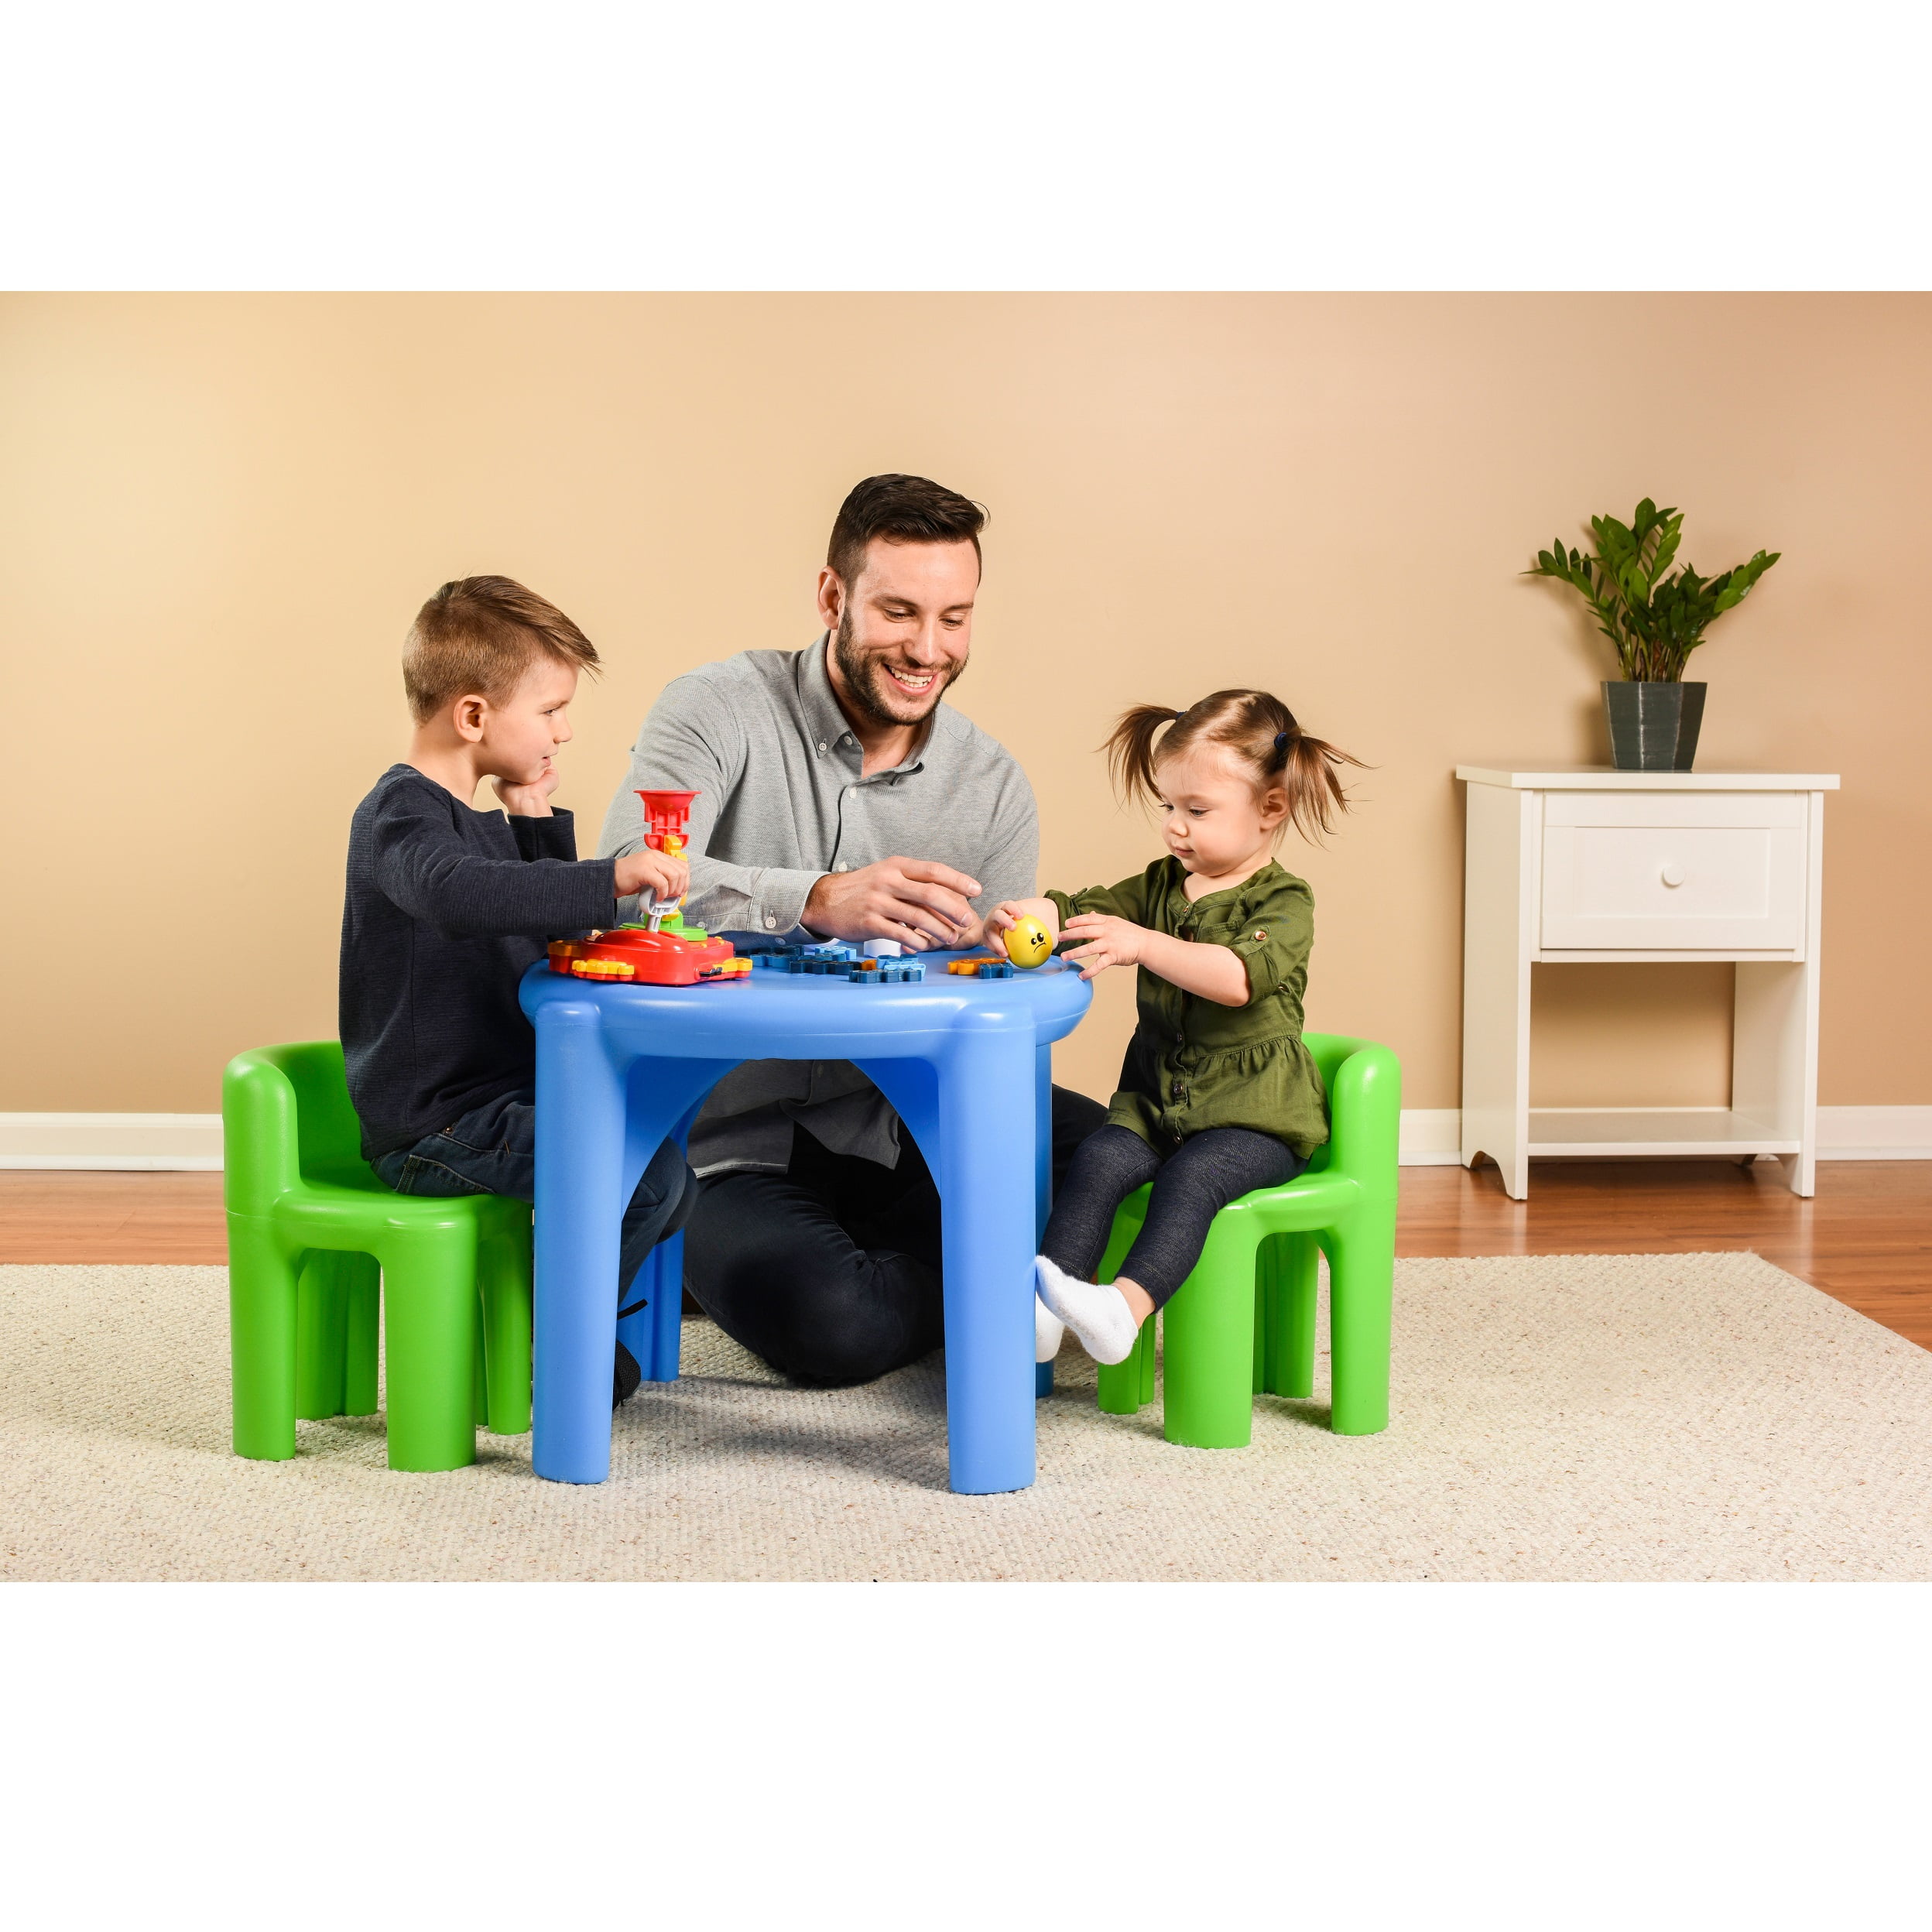 NEW Kids Toddlers Childs My Little Pony Childrens Wooden Table and Chair Set 